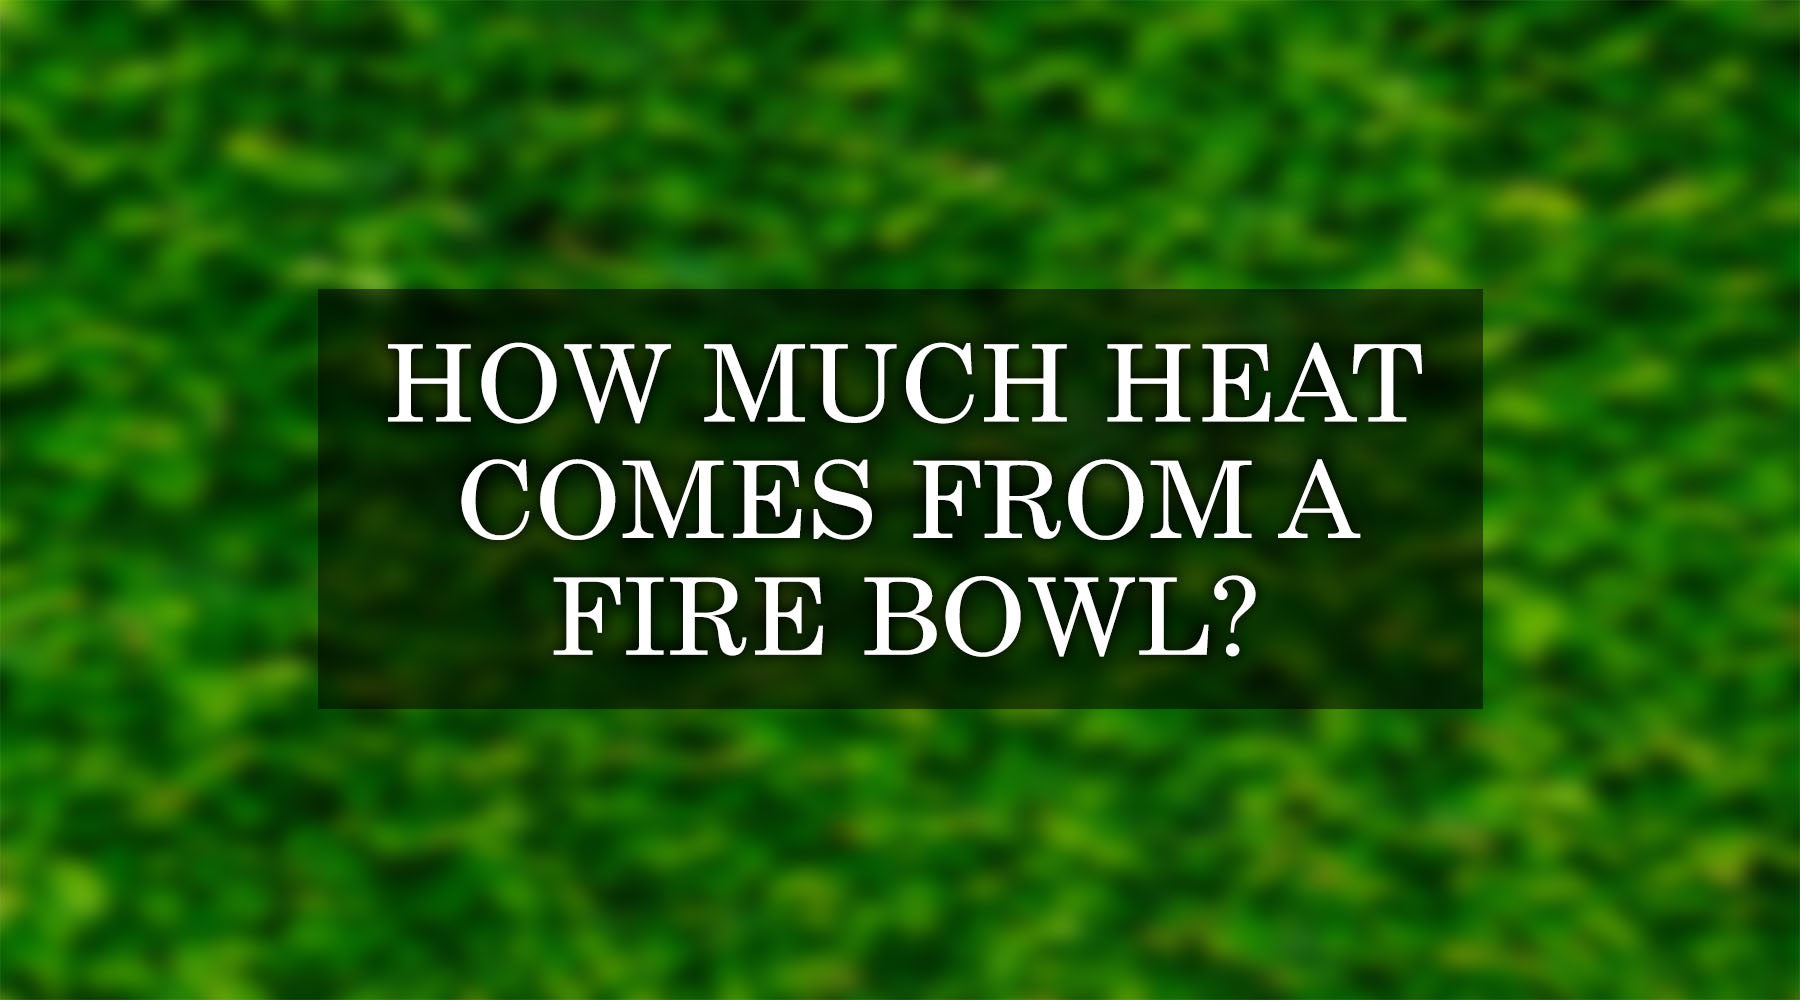 How Much Heat Comes From a Fire Bowl?